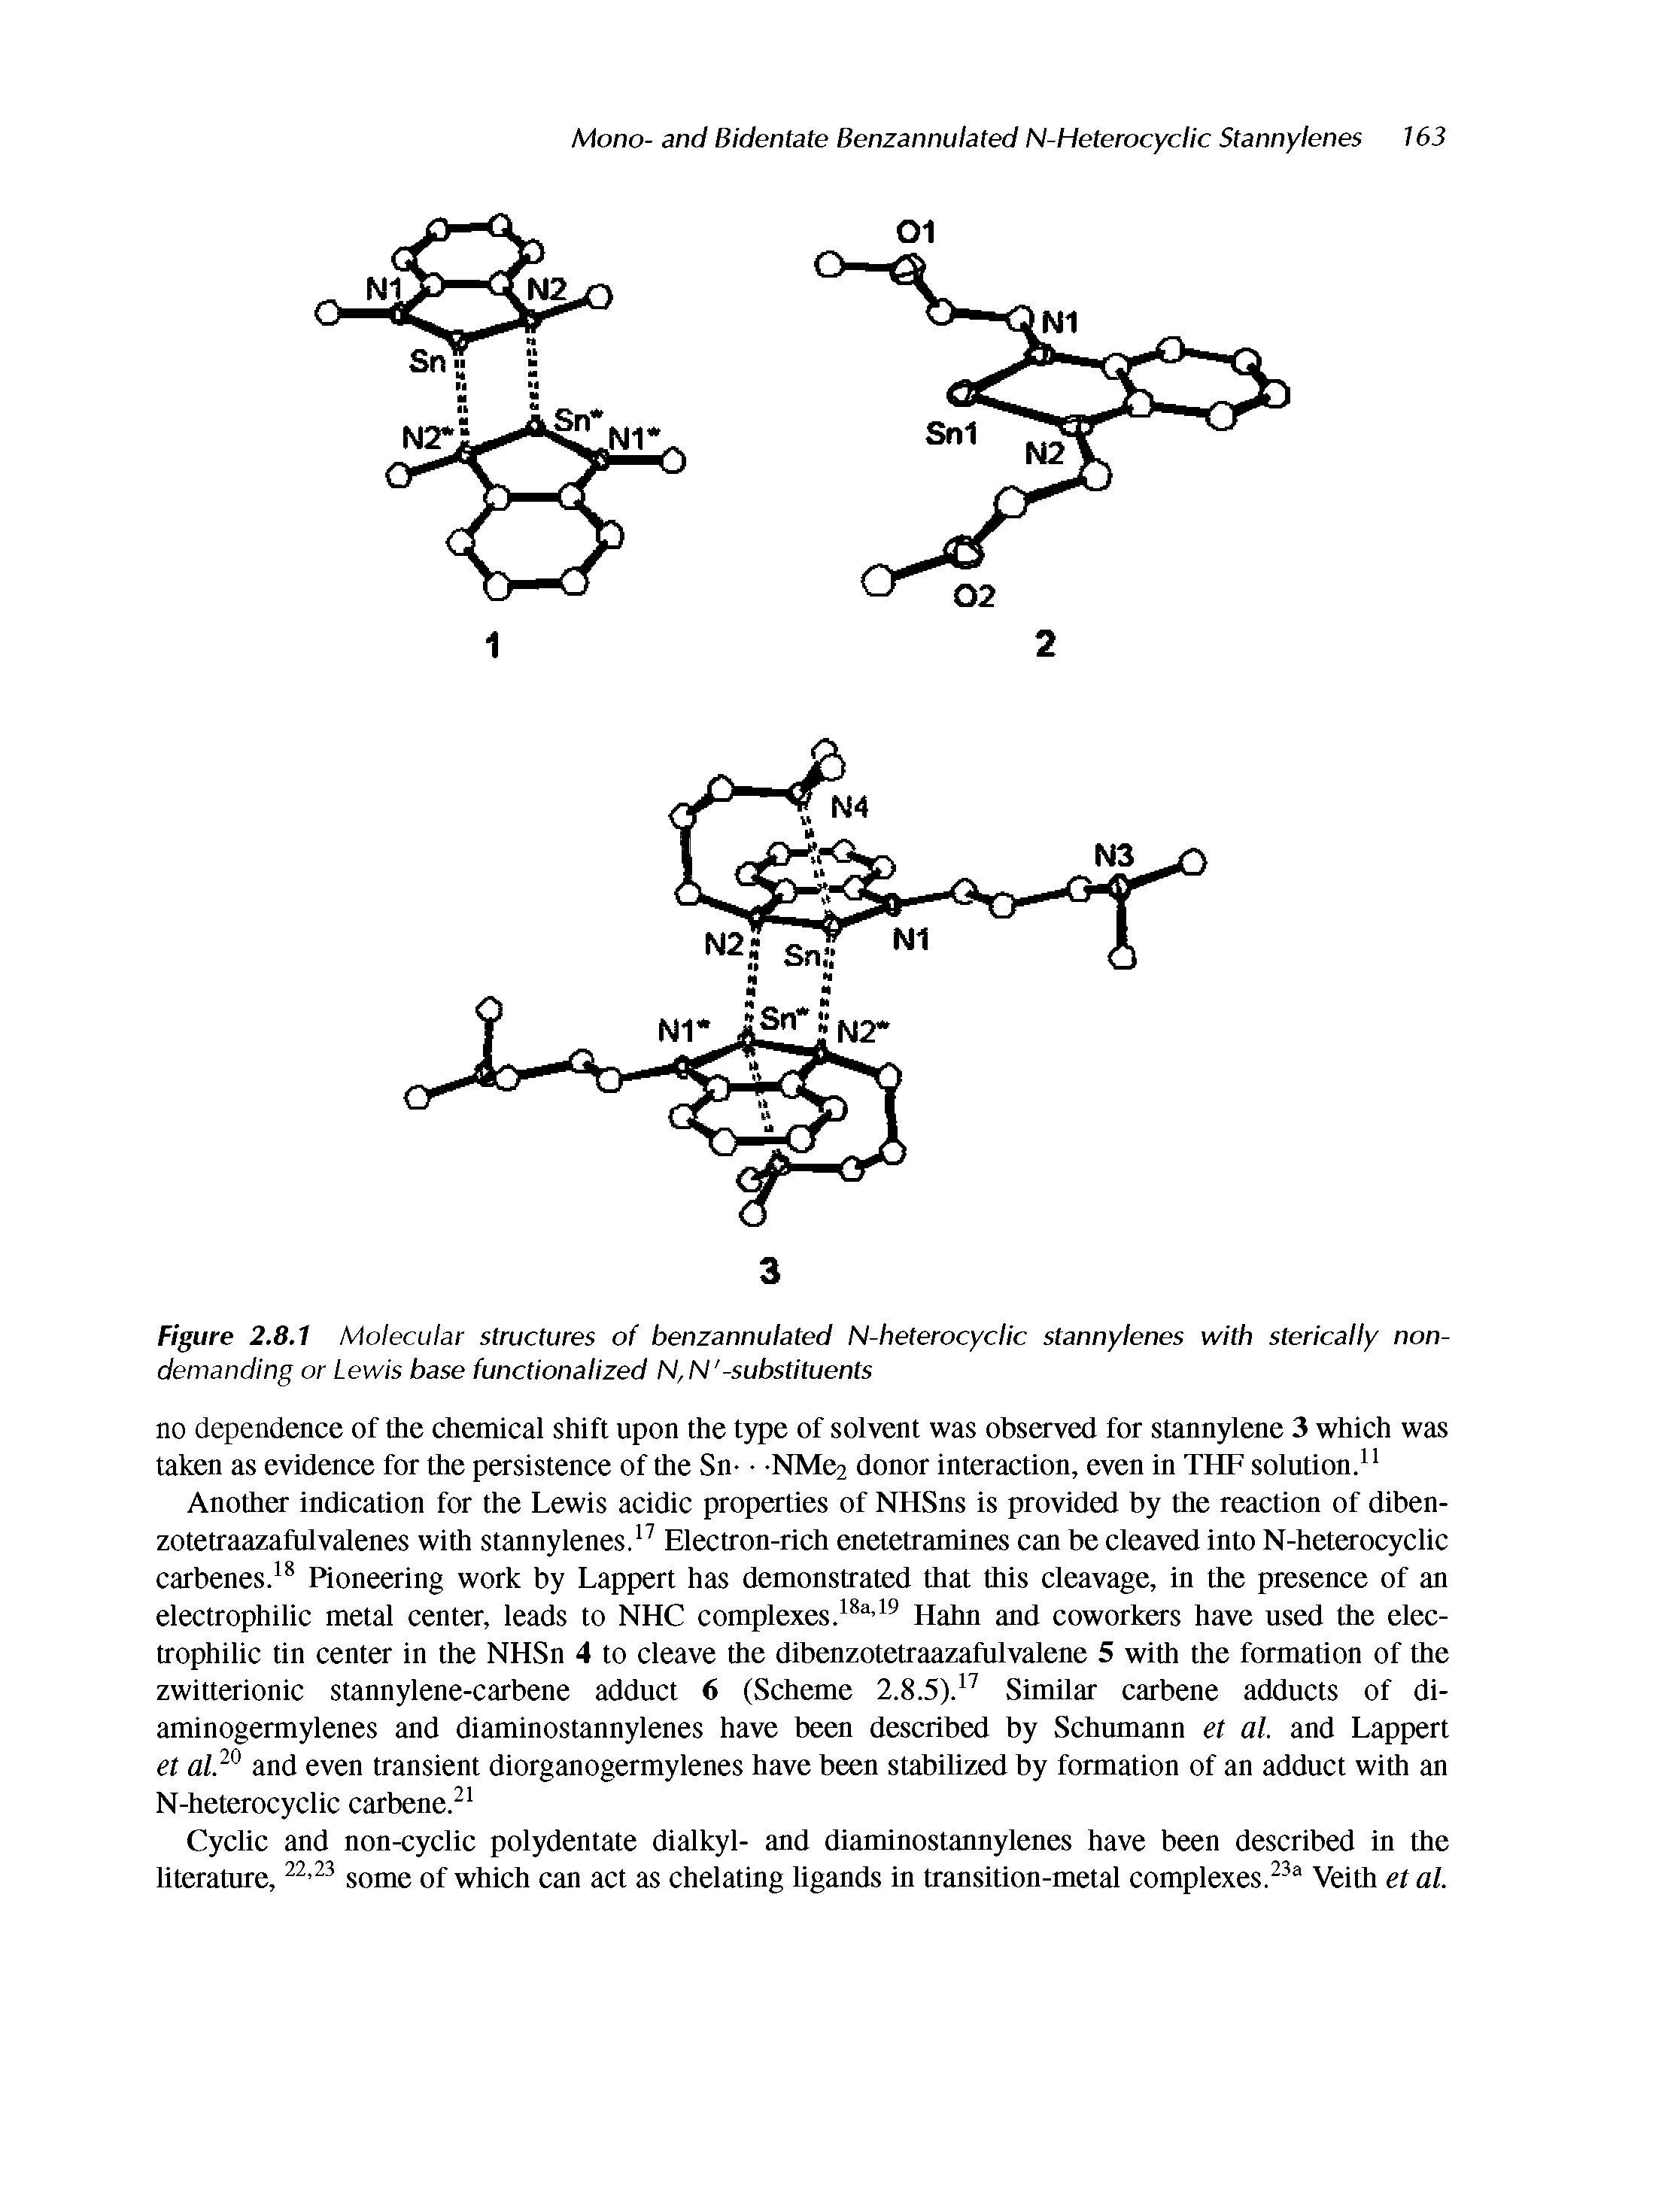 Figure 2.8.1 Molecular structures of benzannulated N-heterocyclic stannylenes with sterically nondemanding or Lewis base functionalized N,N -substituents...